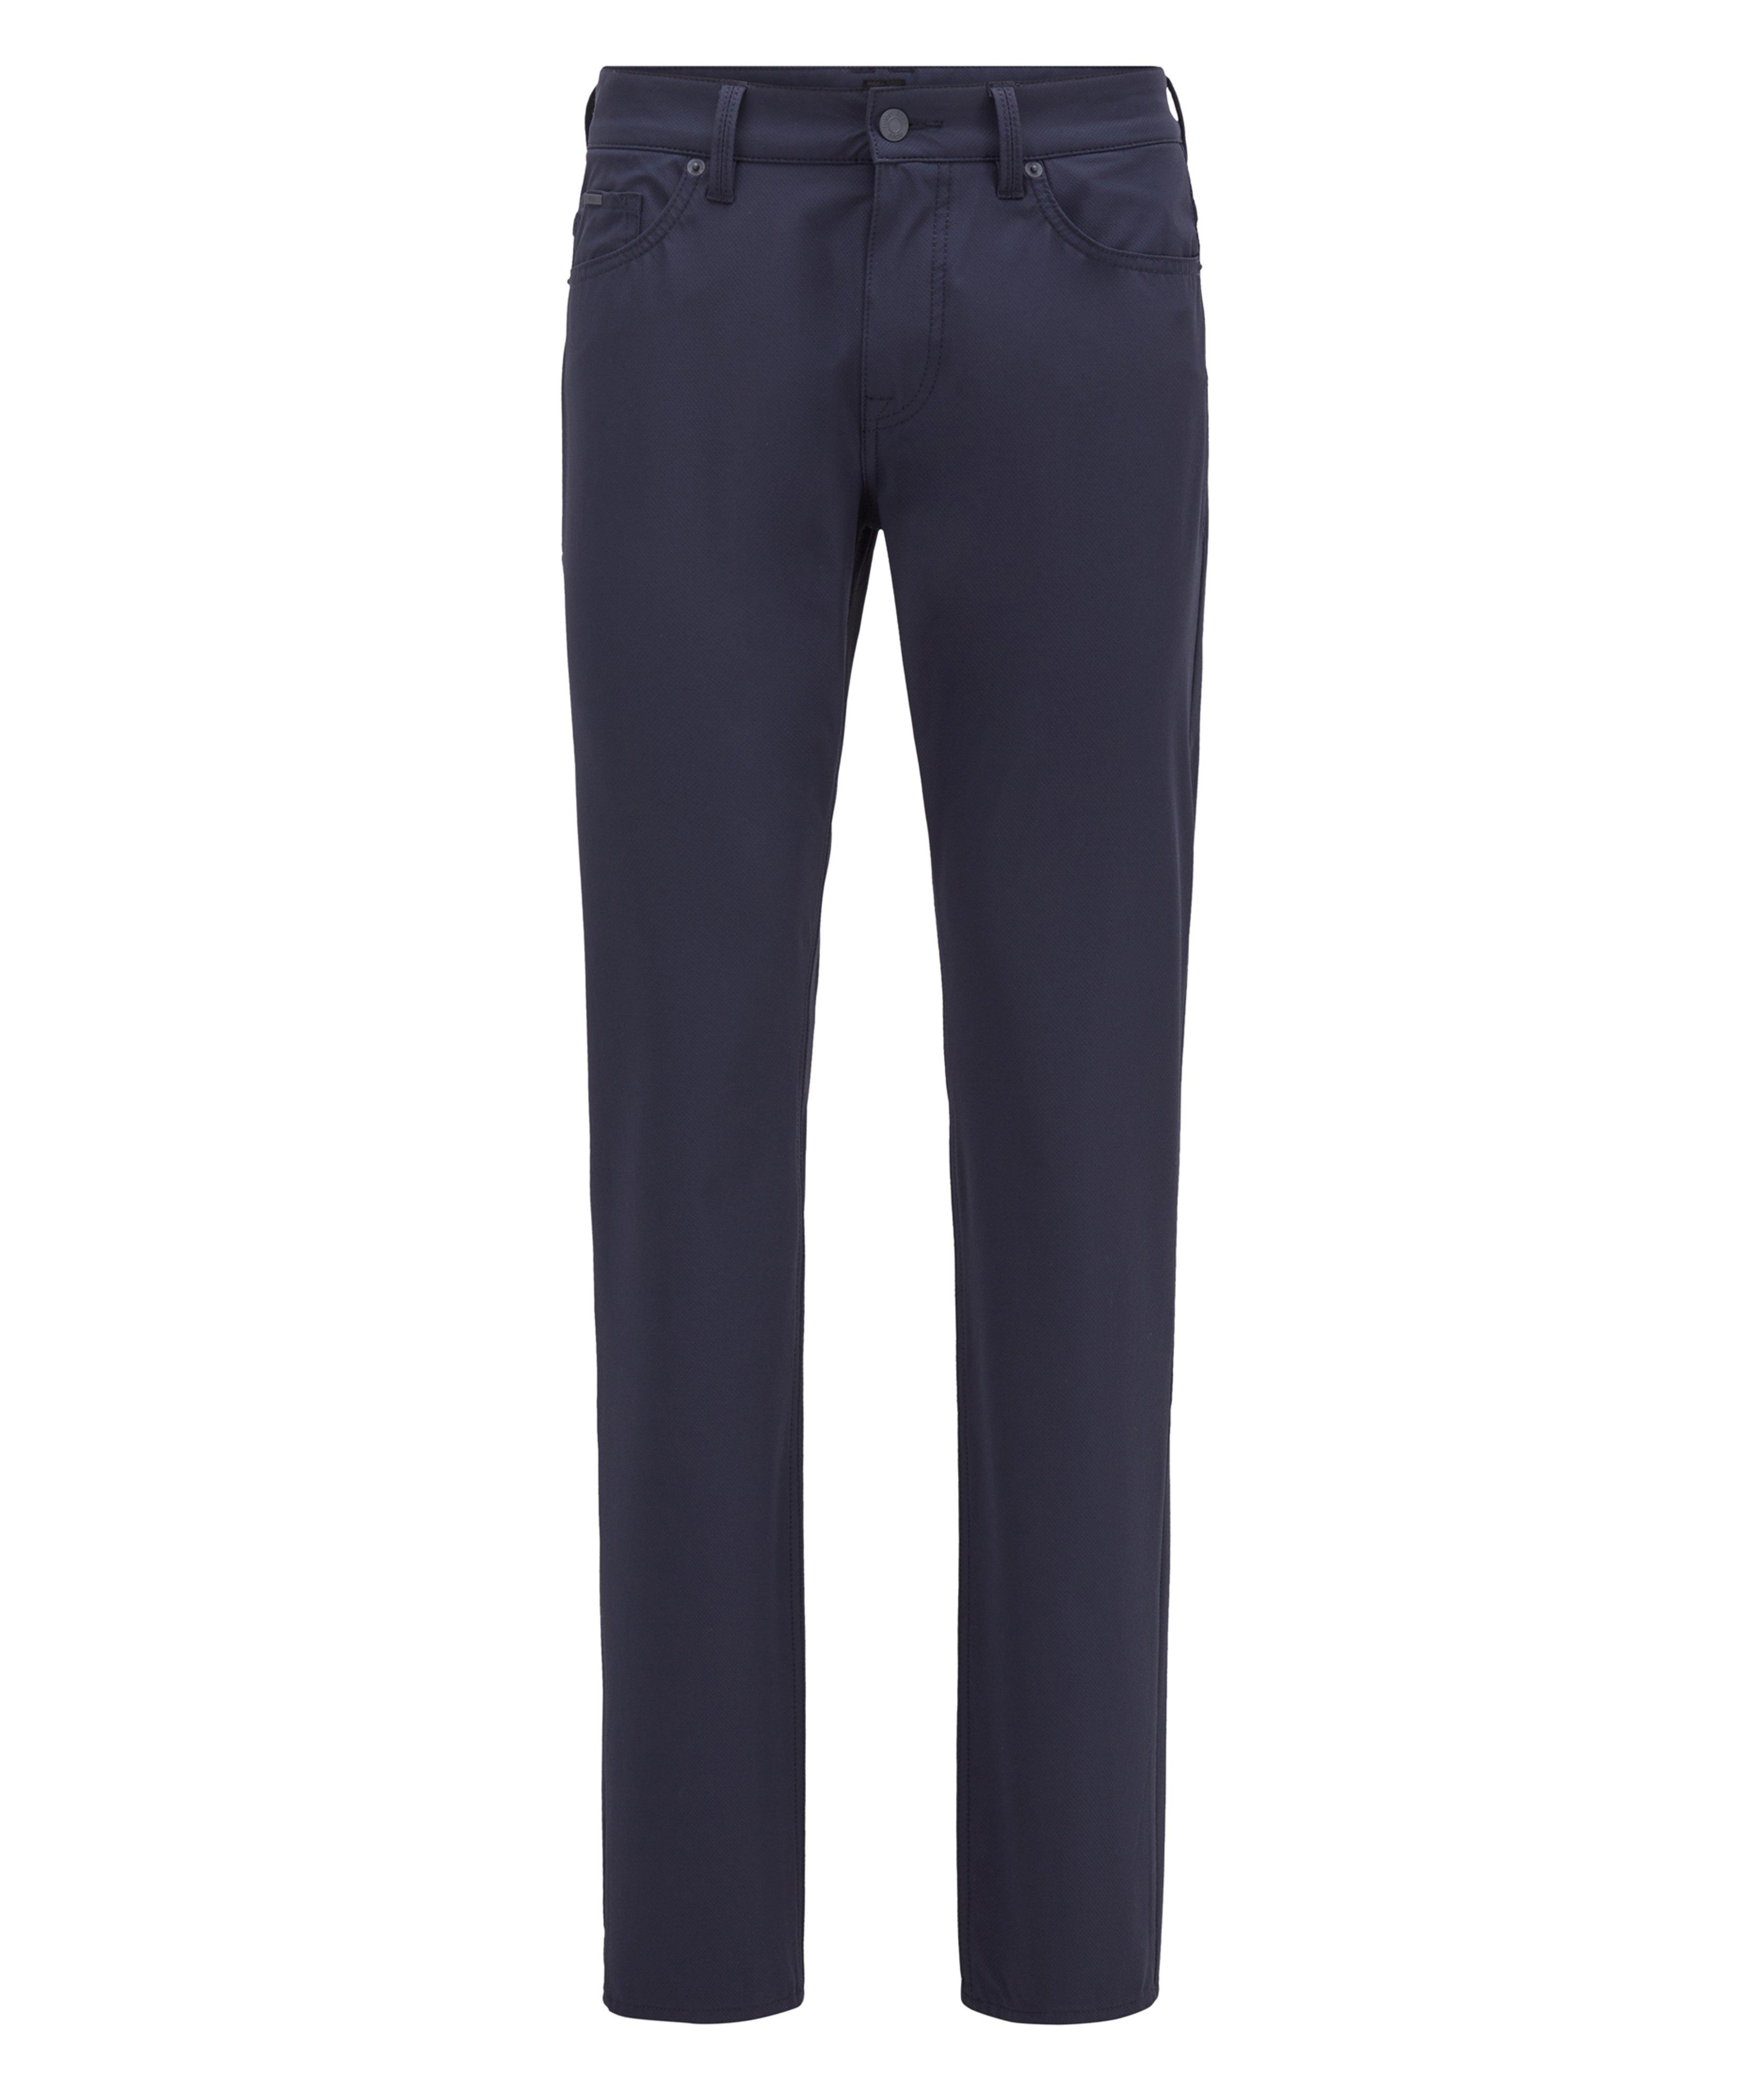 Delaware3 Slim-Fit Technical-Stretch Jeans image 0